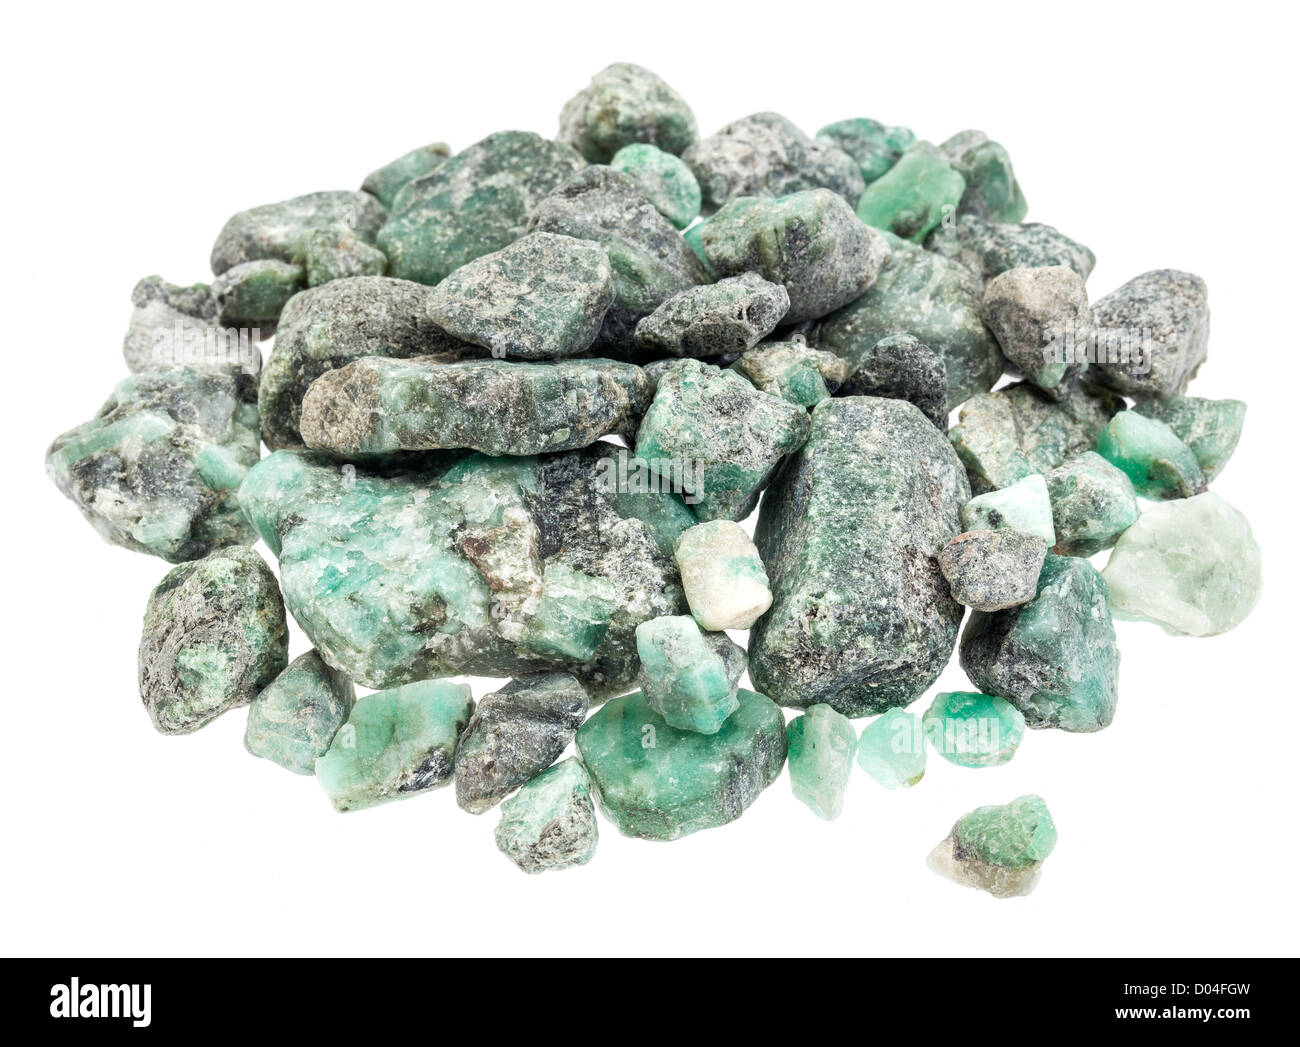 raw emerald gemstones (mineral beryl) with inclusions mined in Brazil, isolated on white Stock Photo